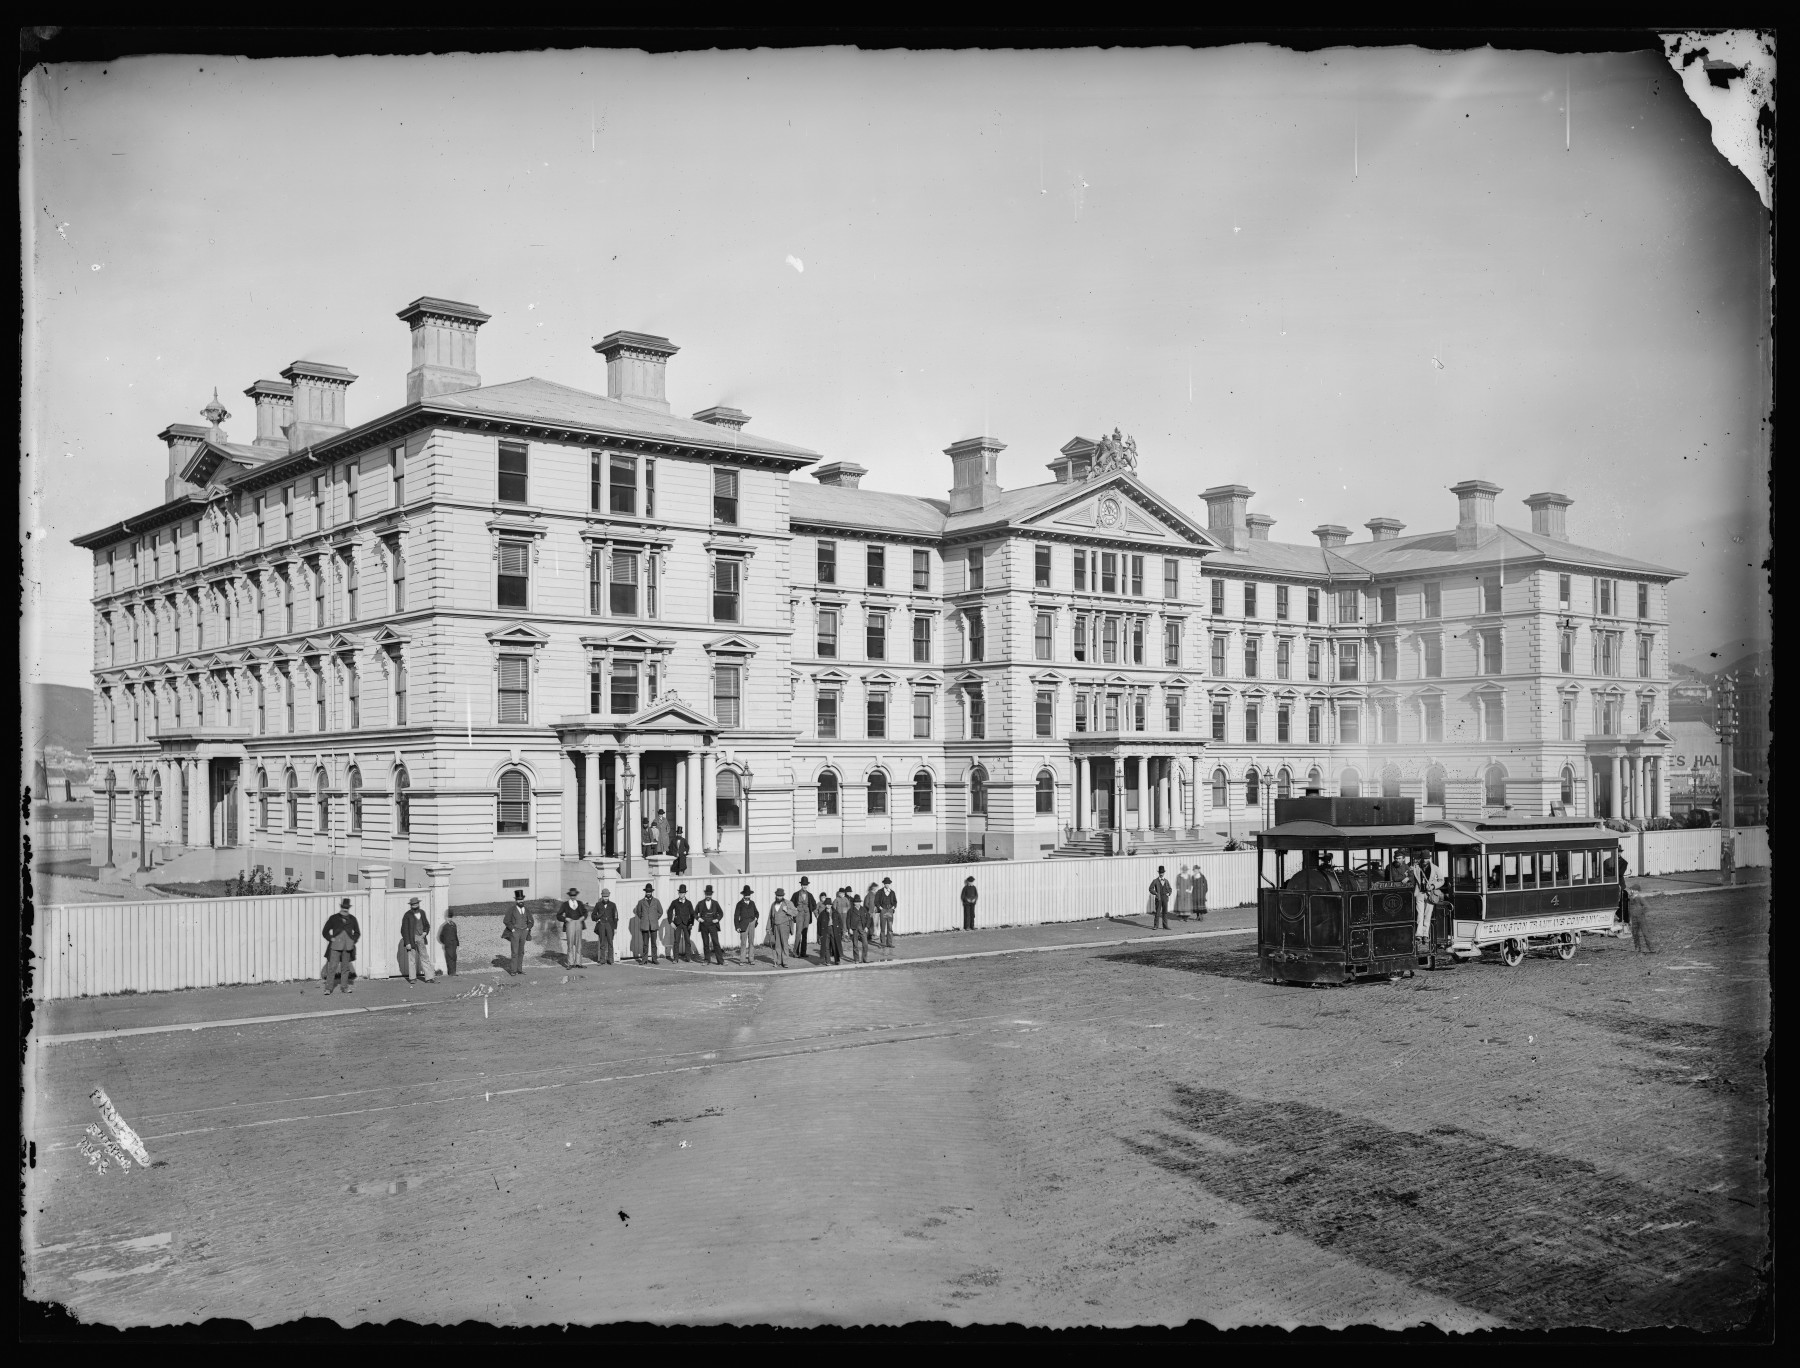 Black and white photo of Old Government Buildings with a tram in the foreground.